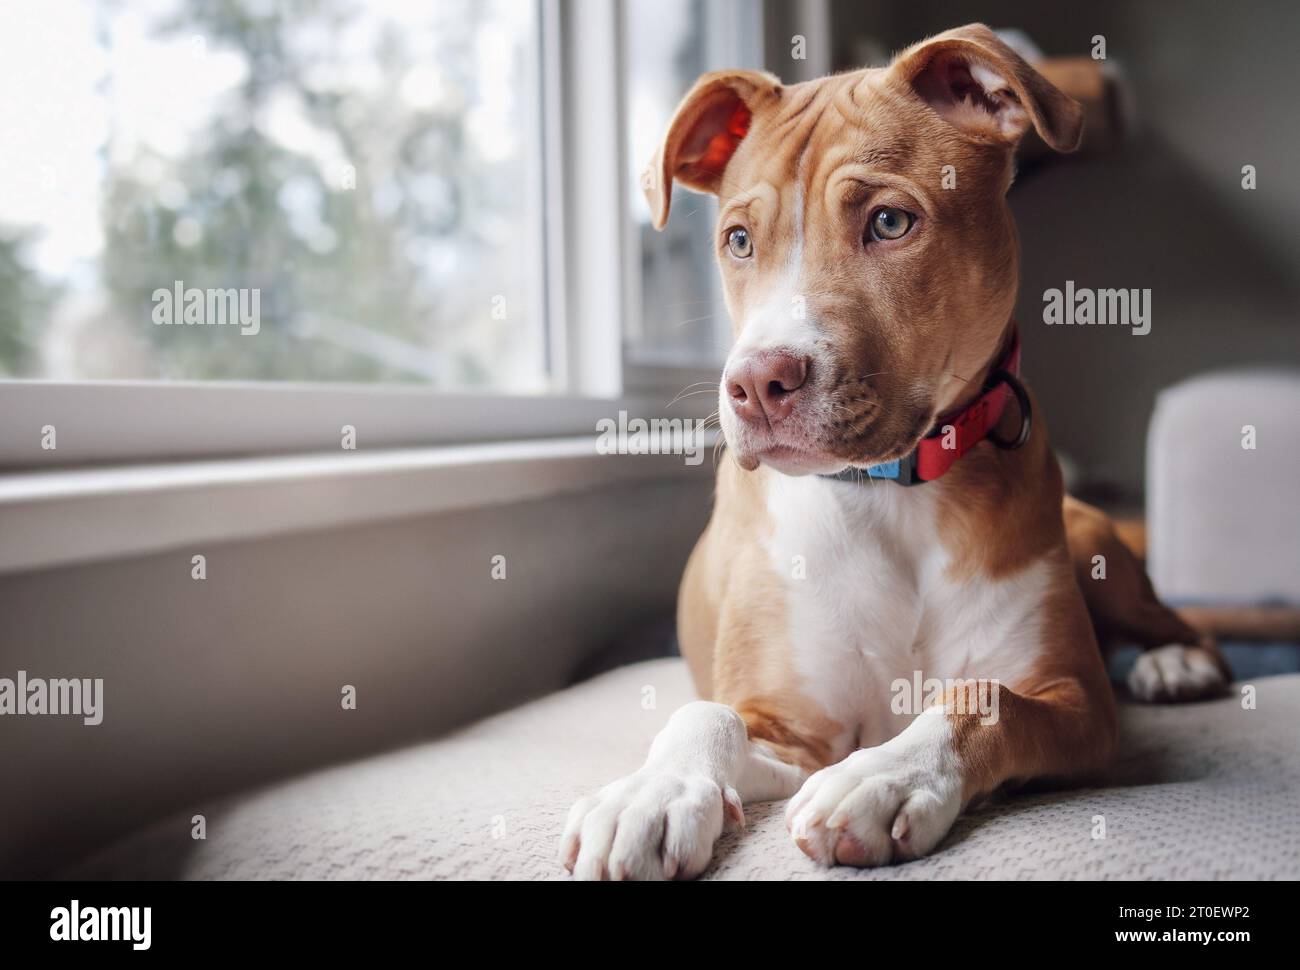 Cute dog waiting for owner to come home. Puppy dog lying by the window on a bench with longing, sad or bored body language. 5 months old, female boxer Stock Photo